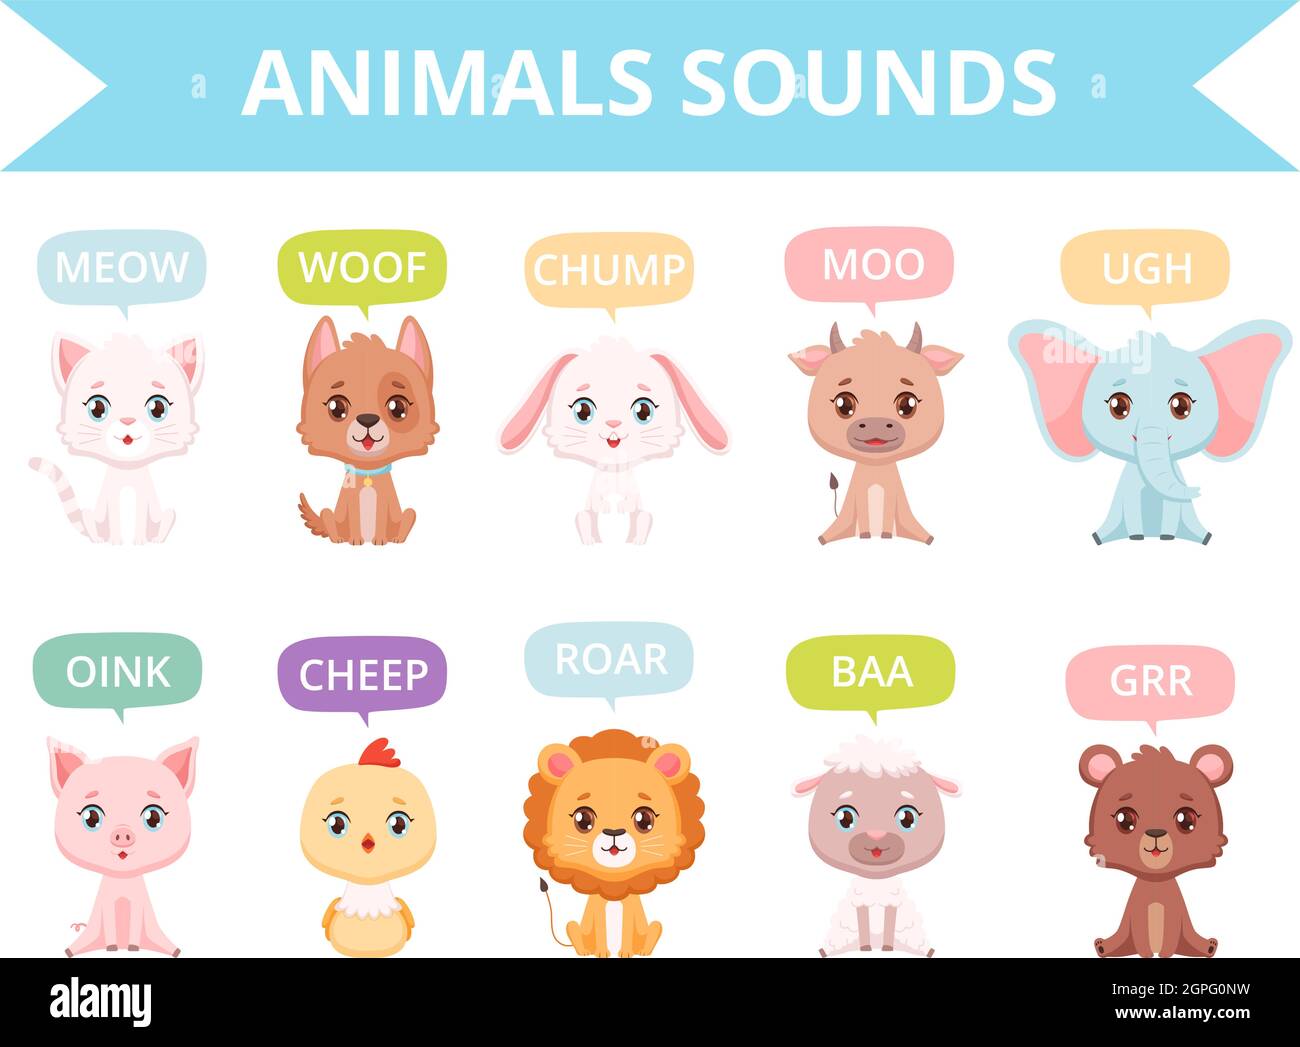 Animals sounds. Zoo birds cats dogs farm animals communication talking speaking words vector characters Stock Vector